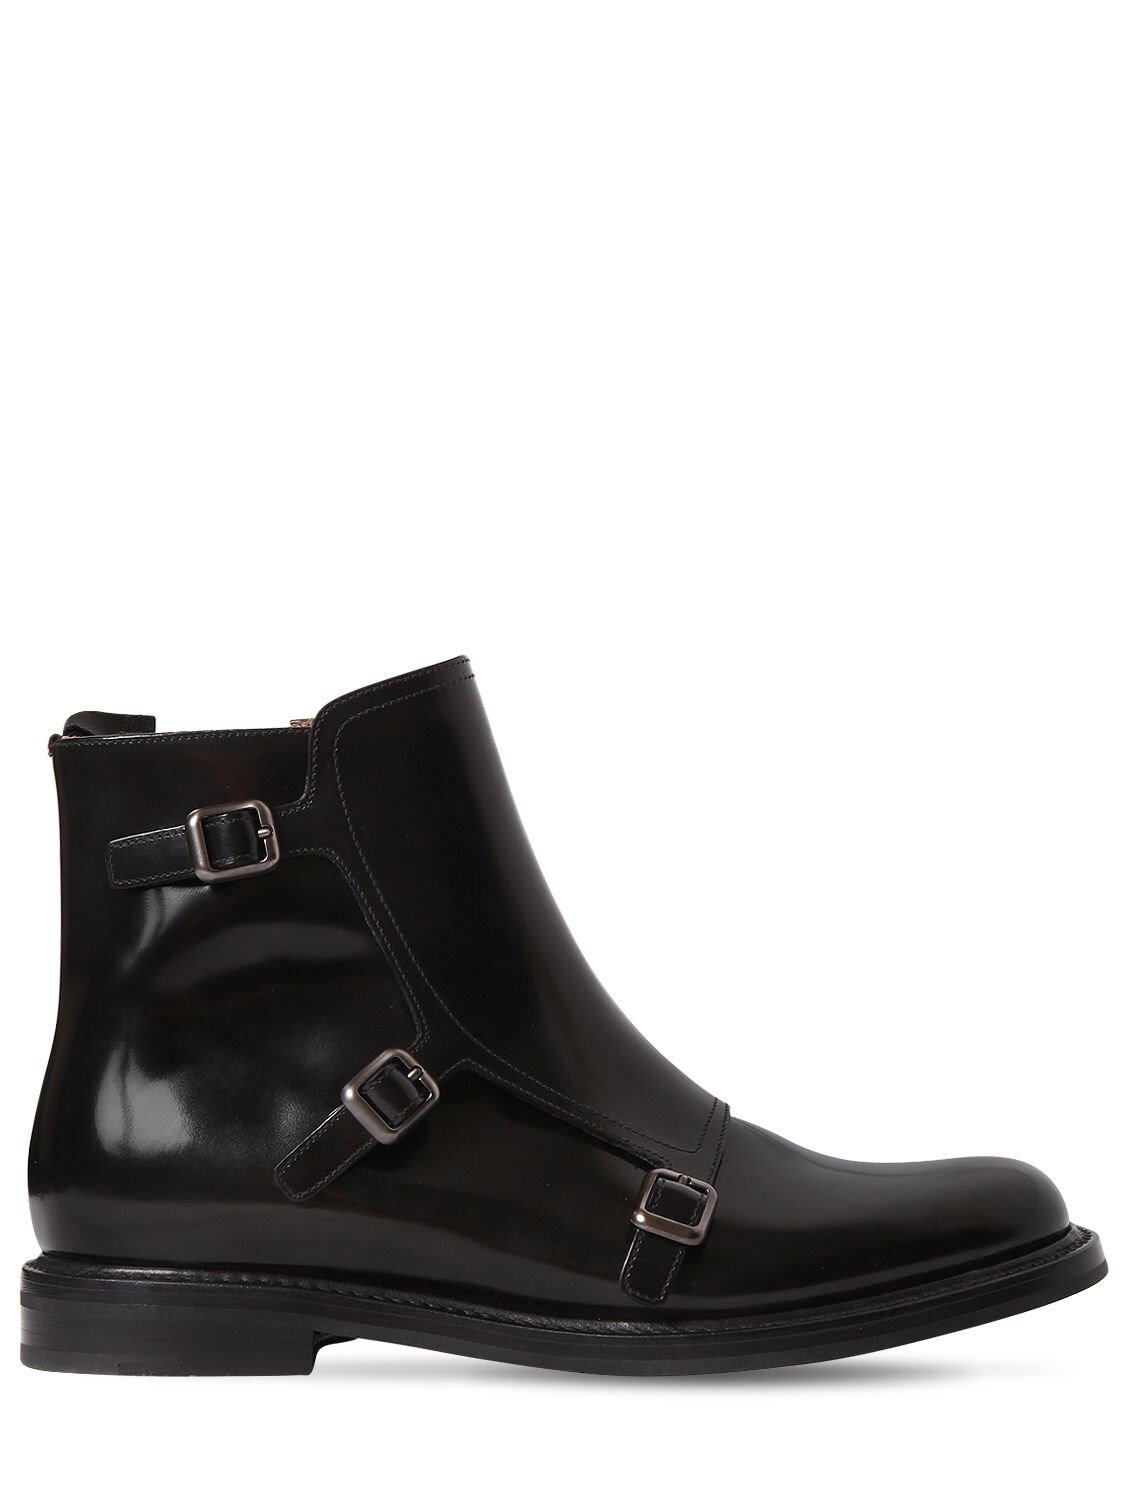 CHURCH'S 20MM AMELIA BUCKLED LEATHER BOOTS,68IW2P006-RjBBQUI1